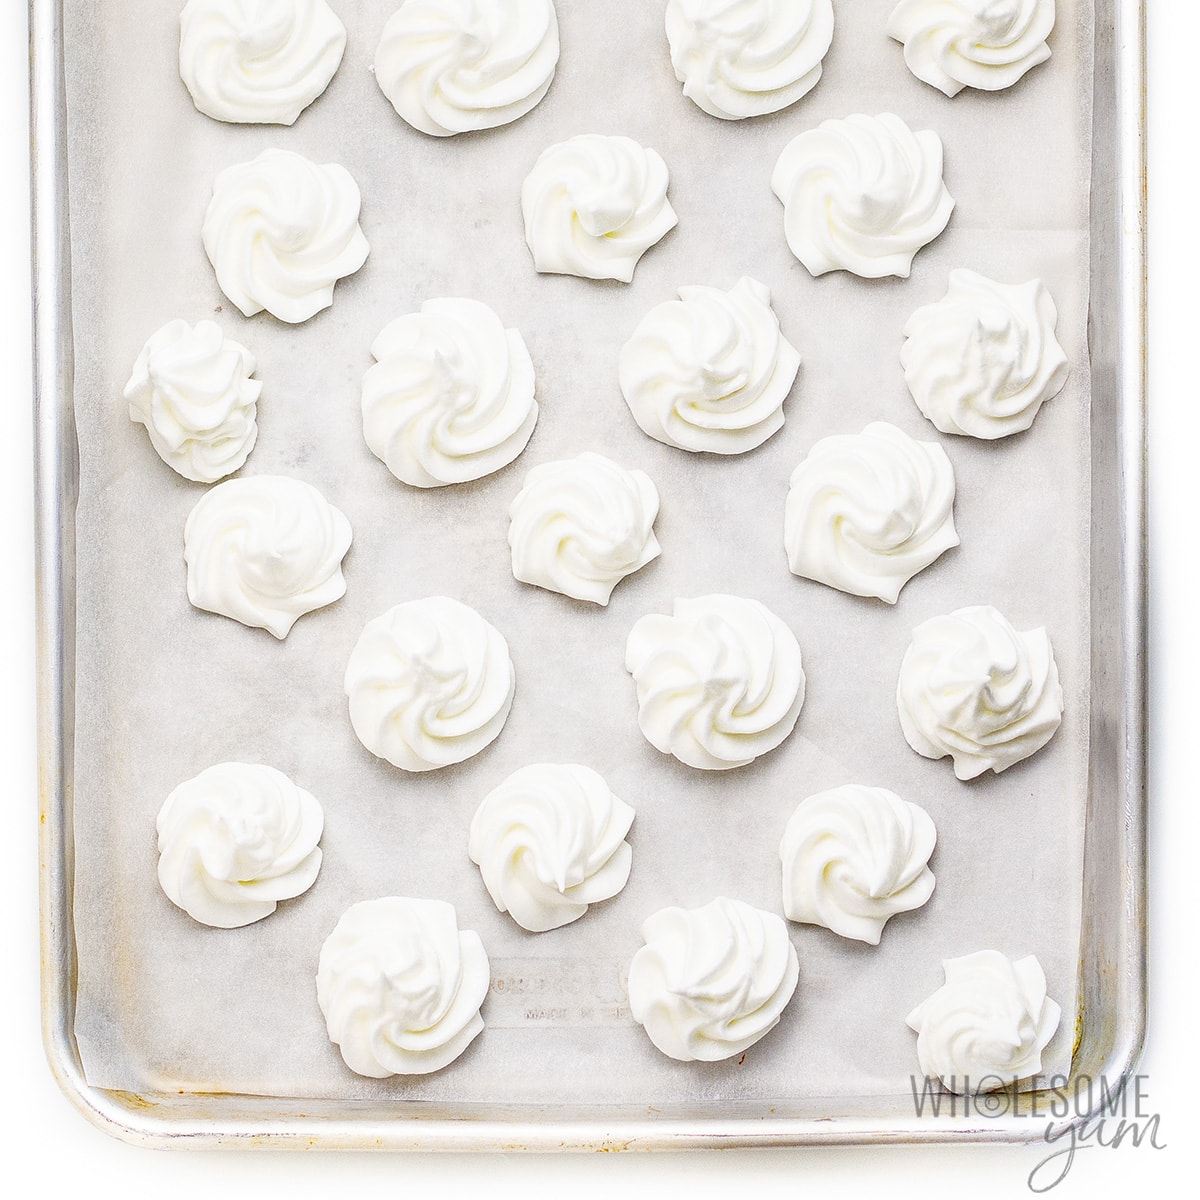 Meringues lined up on a baking sheet.